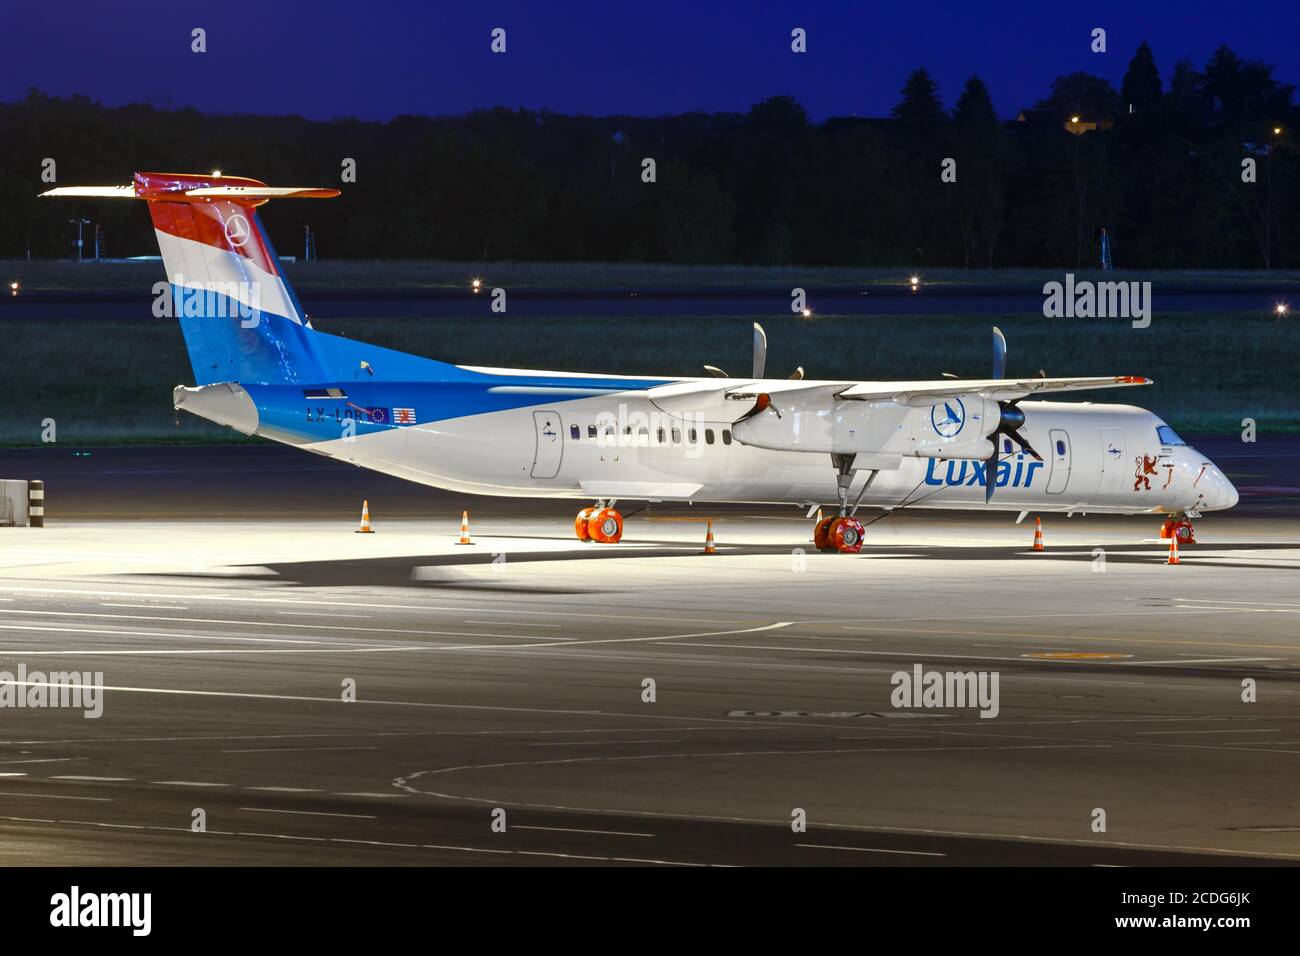 Findel, Luxembourg - June 23, 2020: Luxair Bombardier DHC-8-400 airplane at Findel Airport (LUX) in Luxembourg. Stock Photo